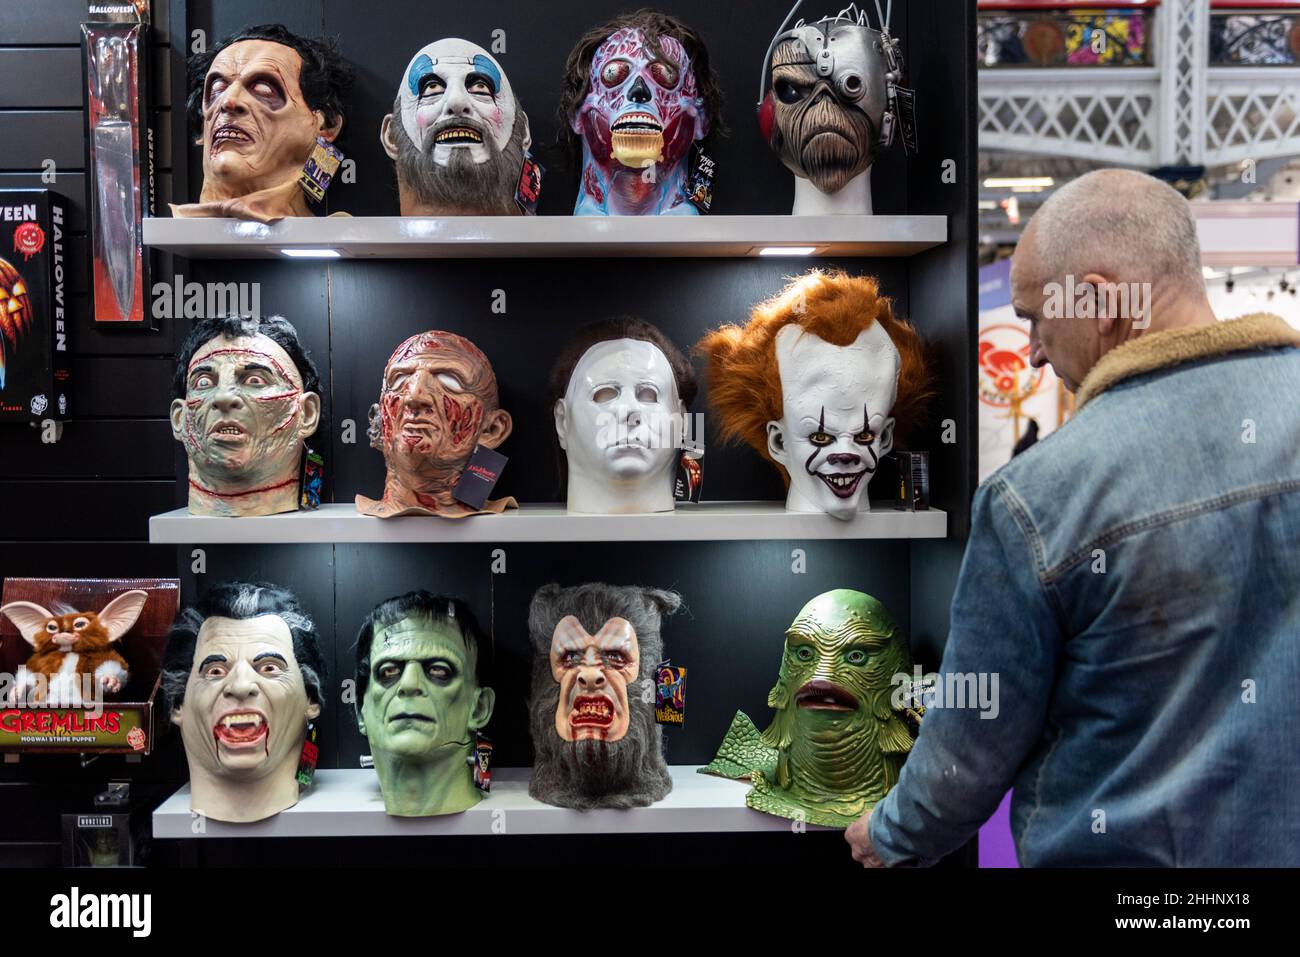 https://c8.alamy.com/comp/2HHNX18/london-uk-25-january-2022-a-visitor-views-masks-by-trick-of-treat-studios-inspired-by-classic-horror-movies-press-day-at-the-toy-fair-the-uks-largest-dedicated-toy-game-and-hobby-trade-show-held-annually-at-olympia-london-more-than-260-companies-are-presenting-the-hottest-new-toys-trends-and-crazes-for-the-year-ahead-to-retailers-buyers-media-and-the-wider-industry-the-event-runs-25-to-27-january-2022-credit-stephen-chung-alamy-live-news-2HHNX18.jpg